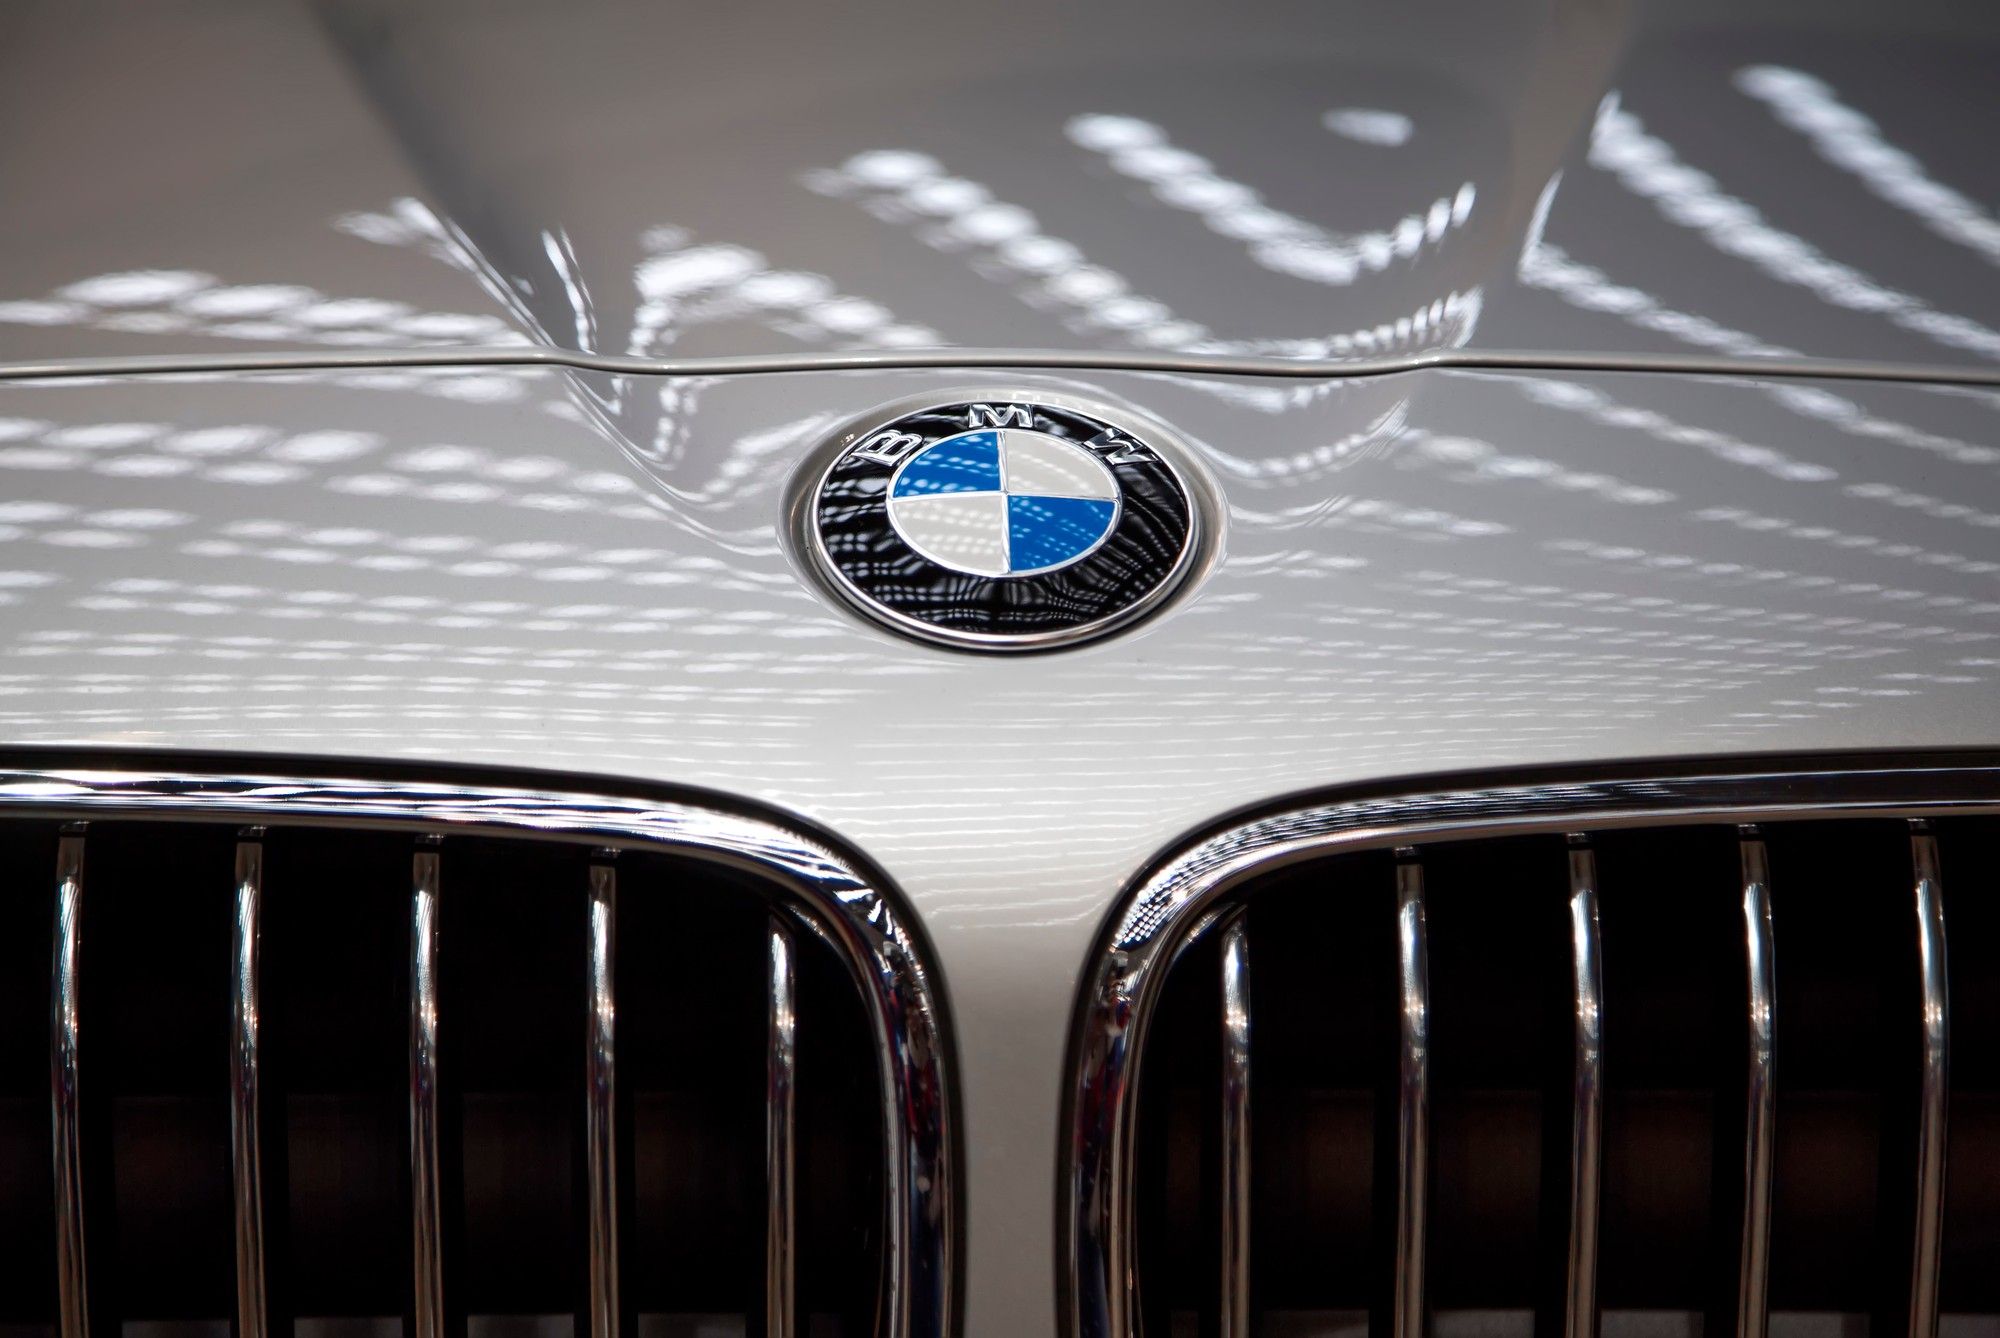 BMW vehicles allegedly have an engine defect which results in low oil levels